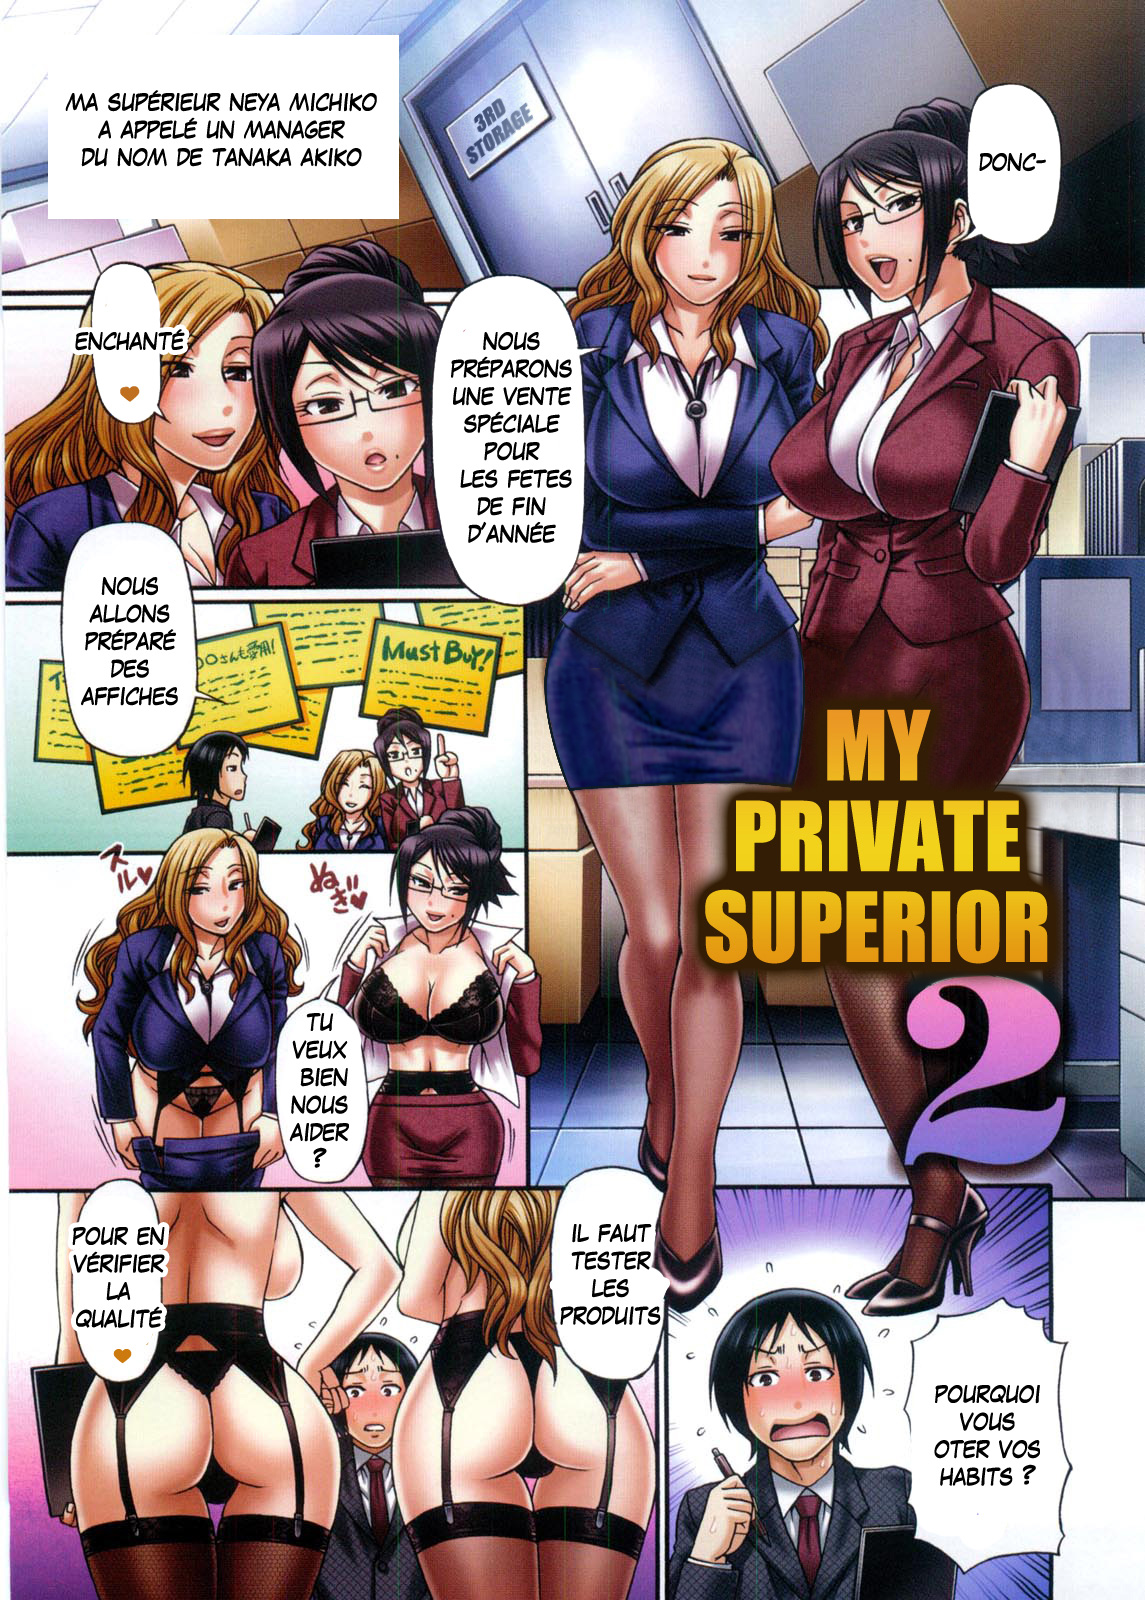 [Chiba Toshirou] My private superior 2 [French] {Adopte un pervers} [チバトシロウ] 私的上司 2 (好色グラマラス) [フランス翻訳]